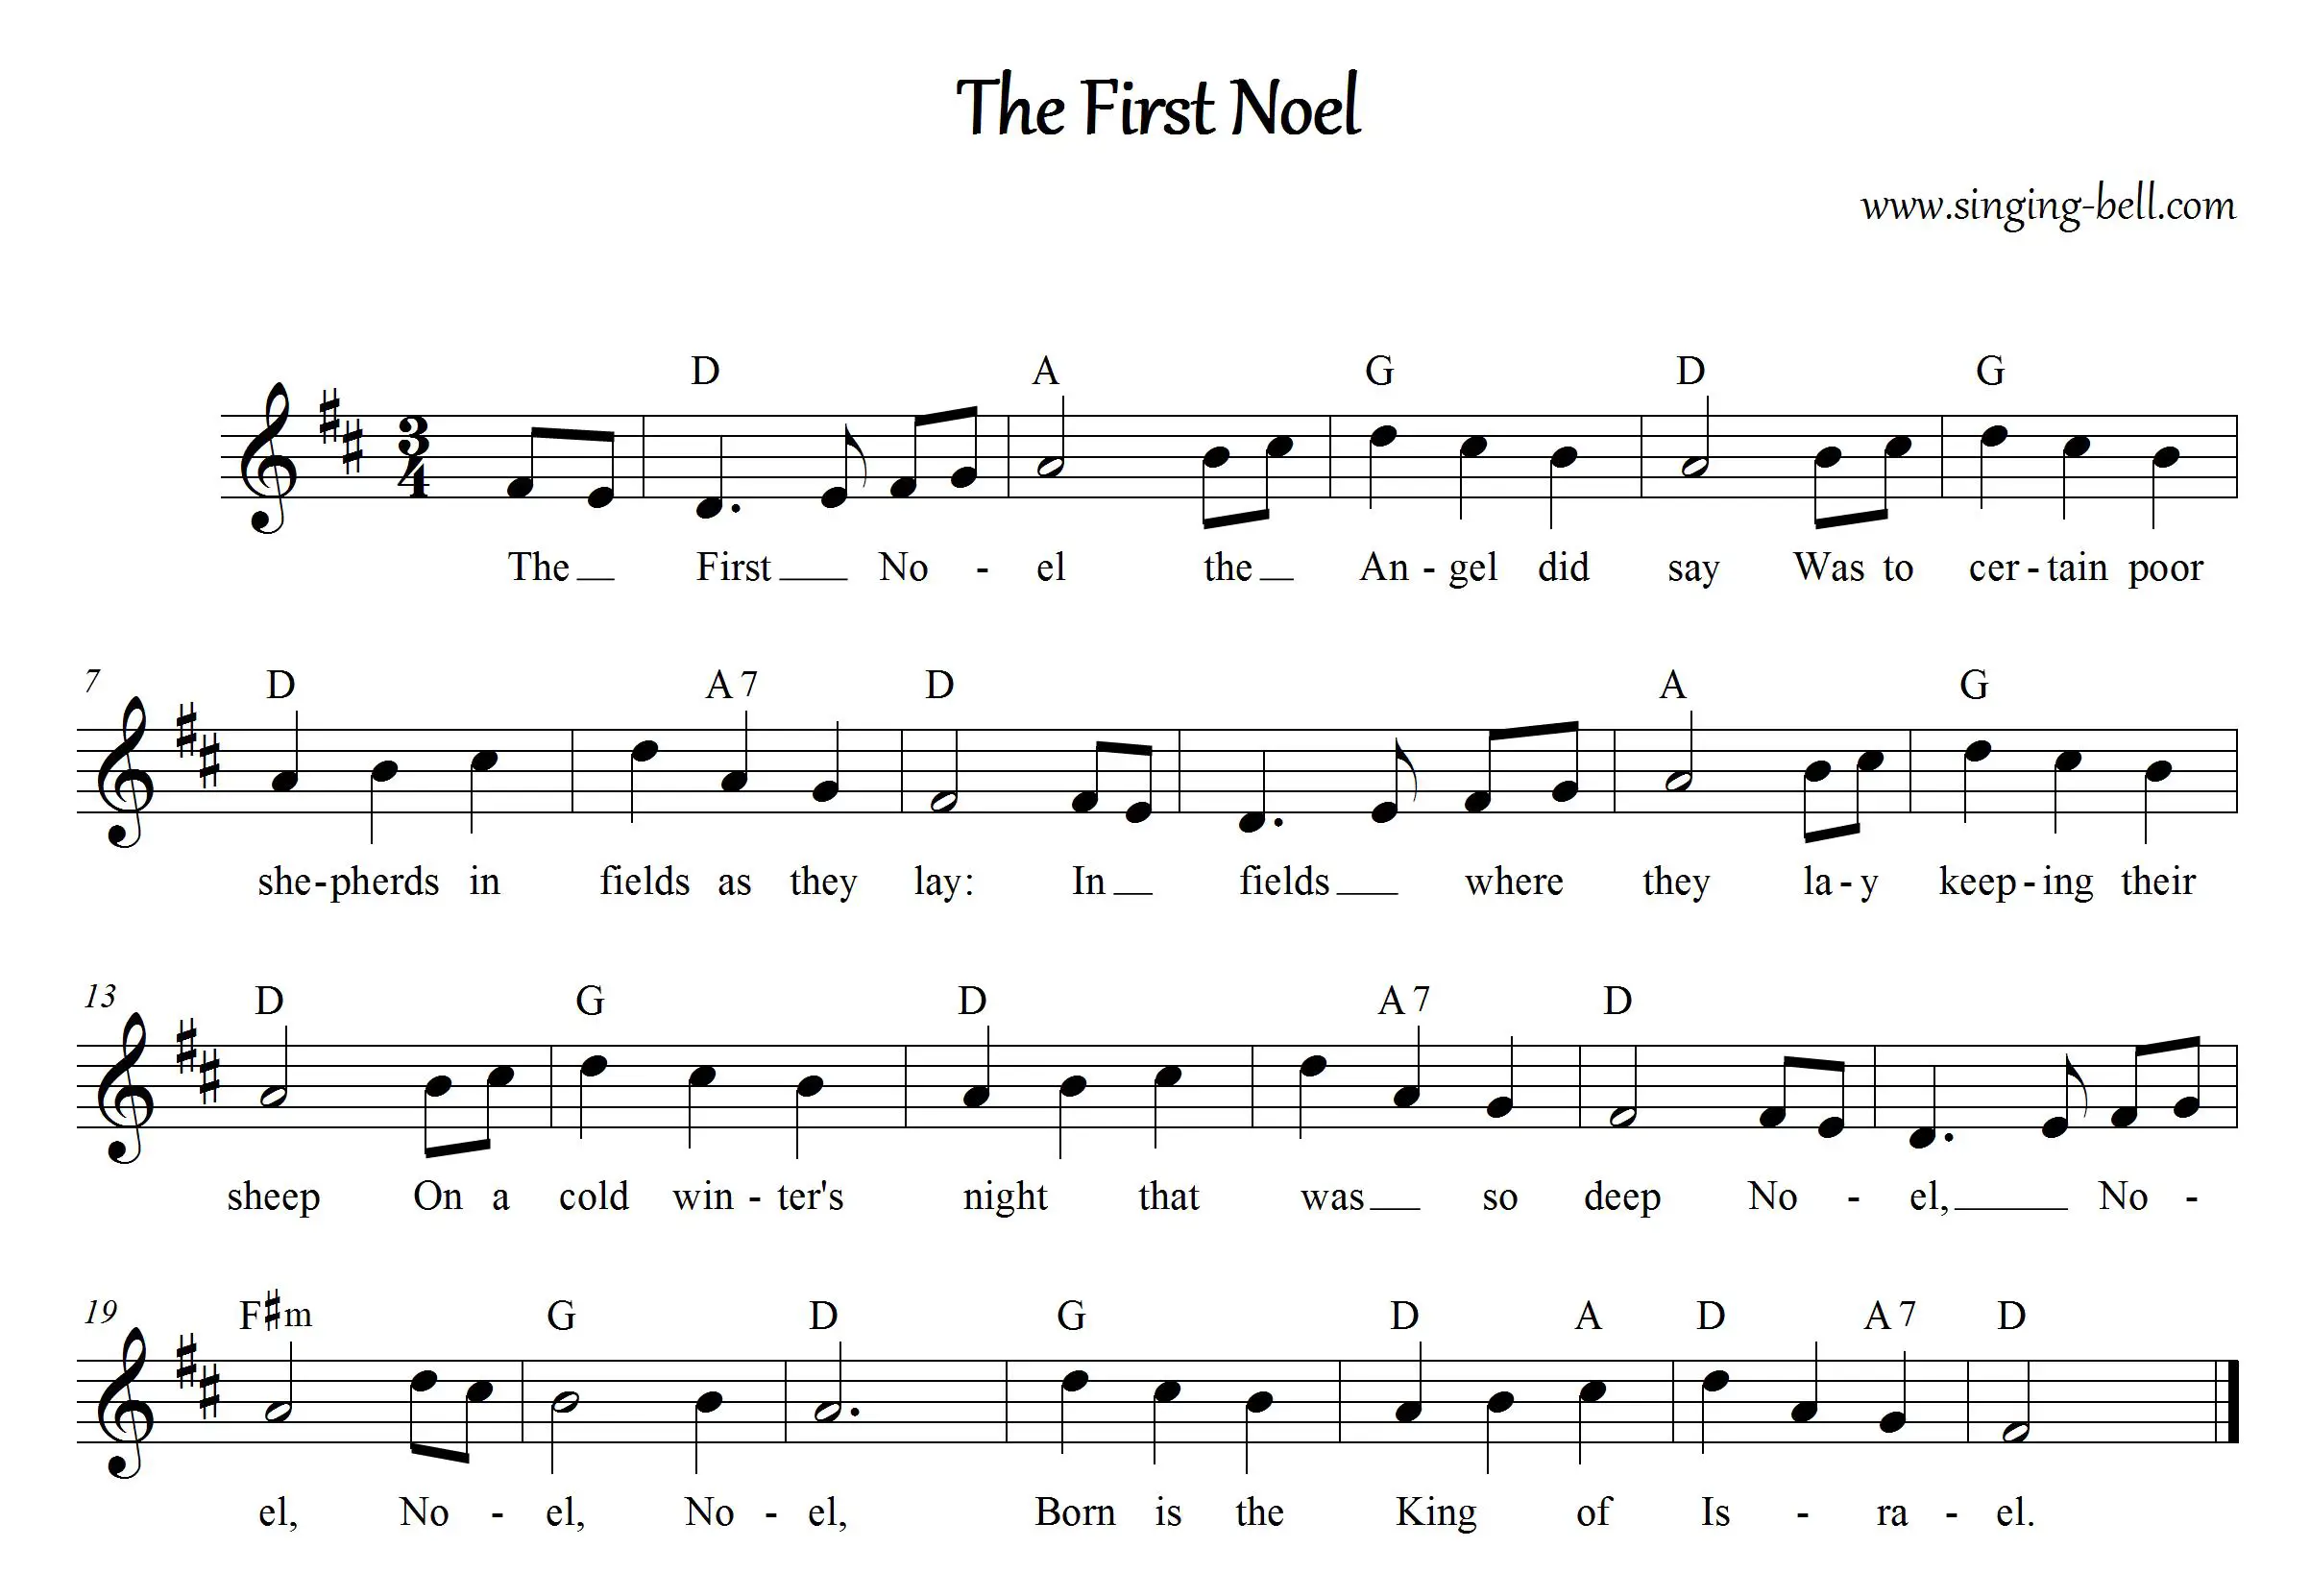 Free Christmas Carols > The First Noel - free mp3 audio song download